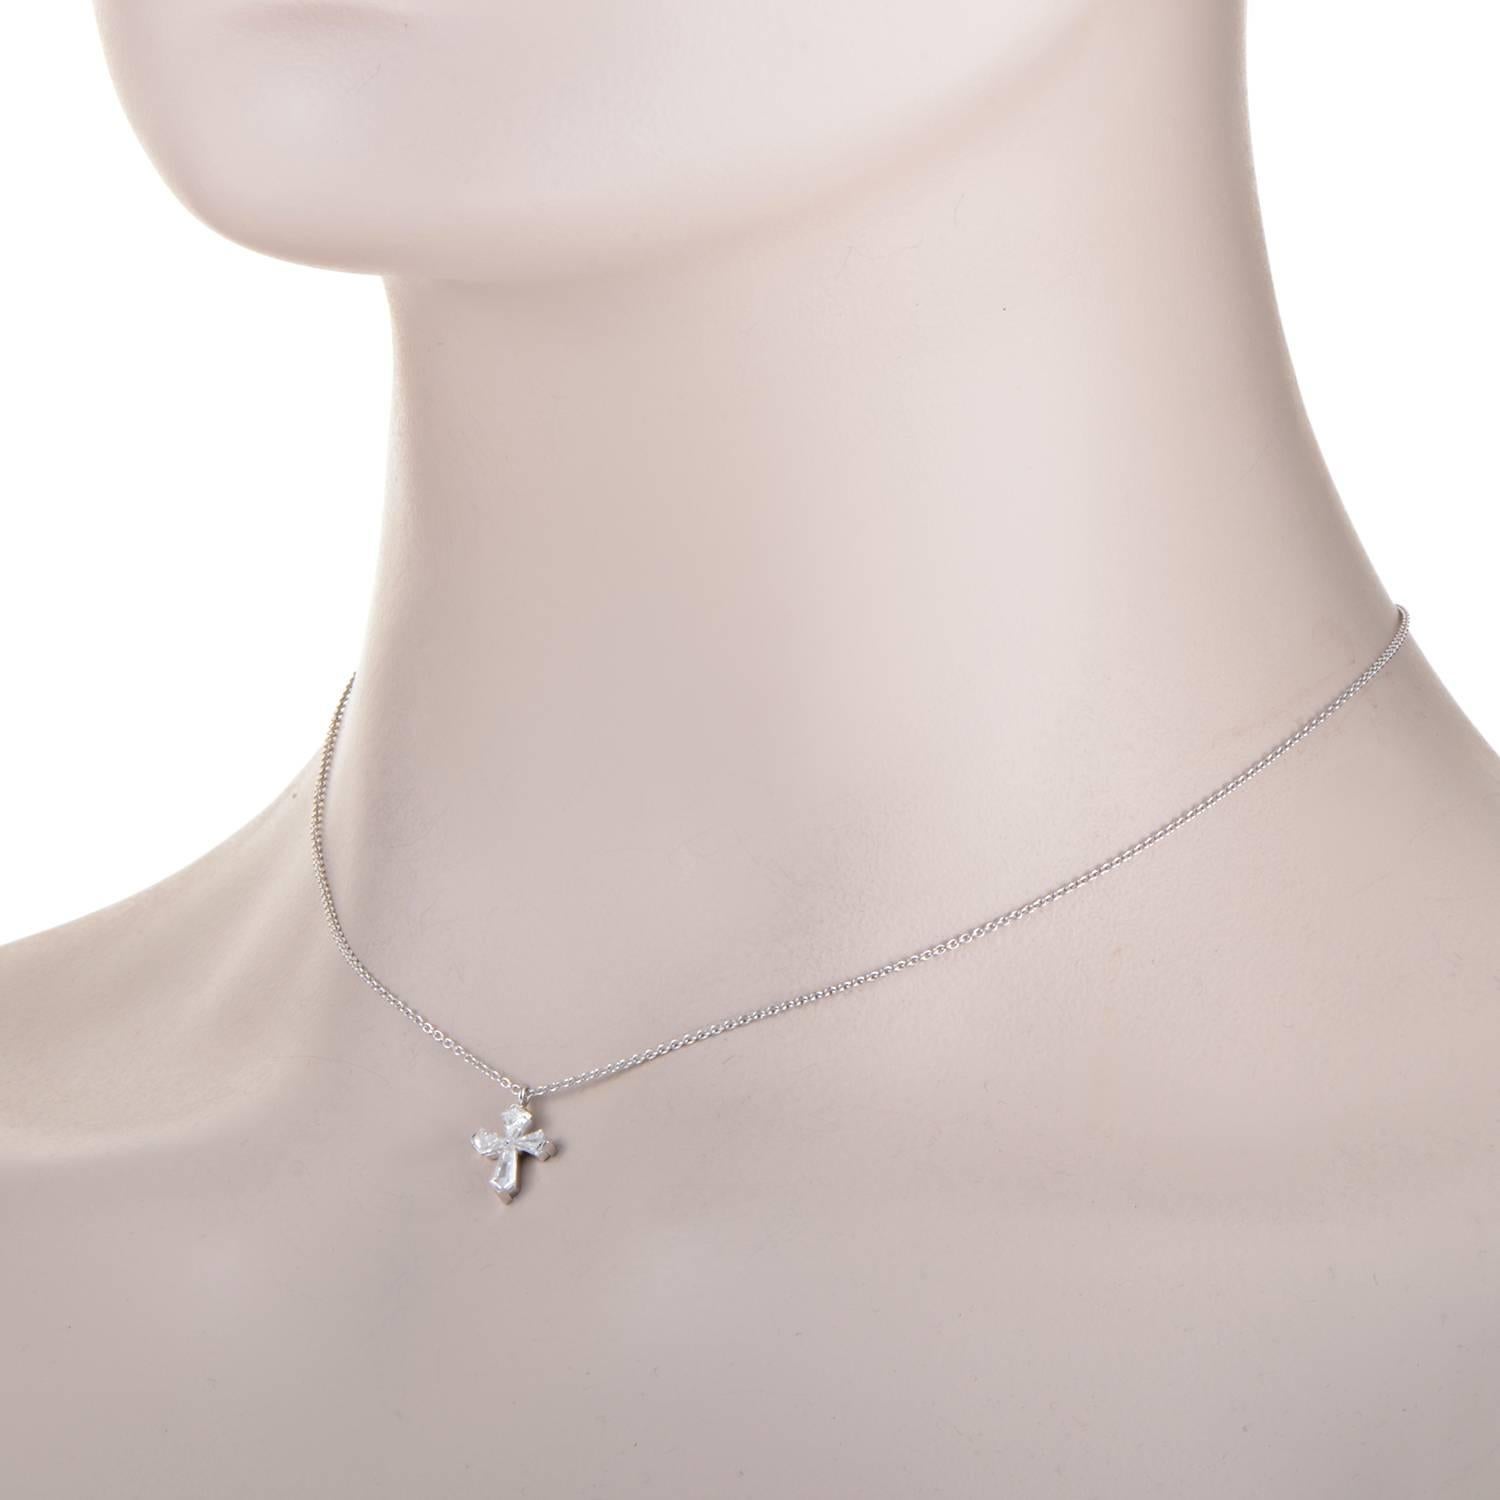 The powerful and alluring symbol of a cross is given an irresistible prestigious glare by the marvelously cut diamonds weighing in total approximately 0.75ct in this astonishing 18K white gold necklace from Graff.
Included Items: Manufacturer's